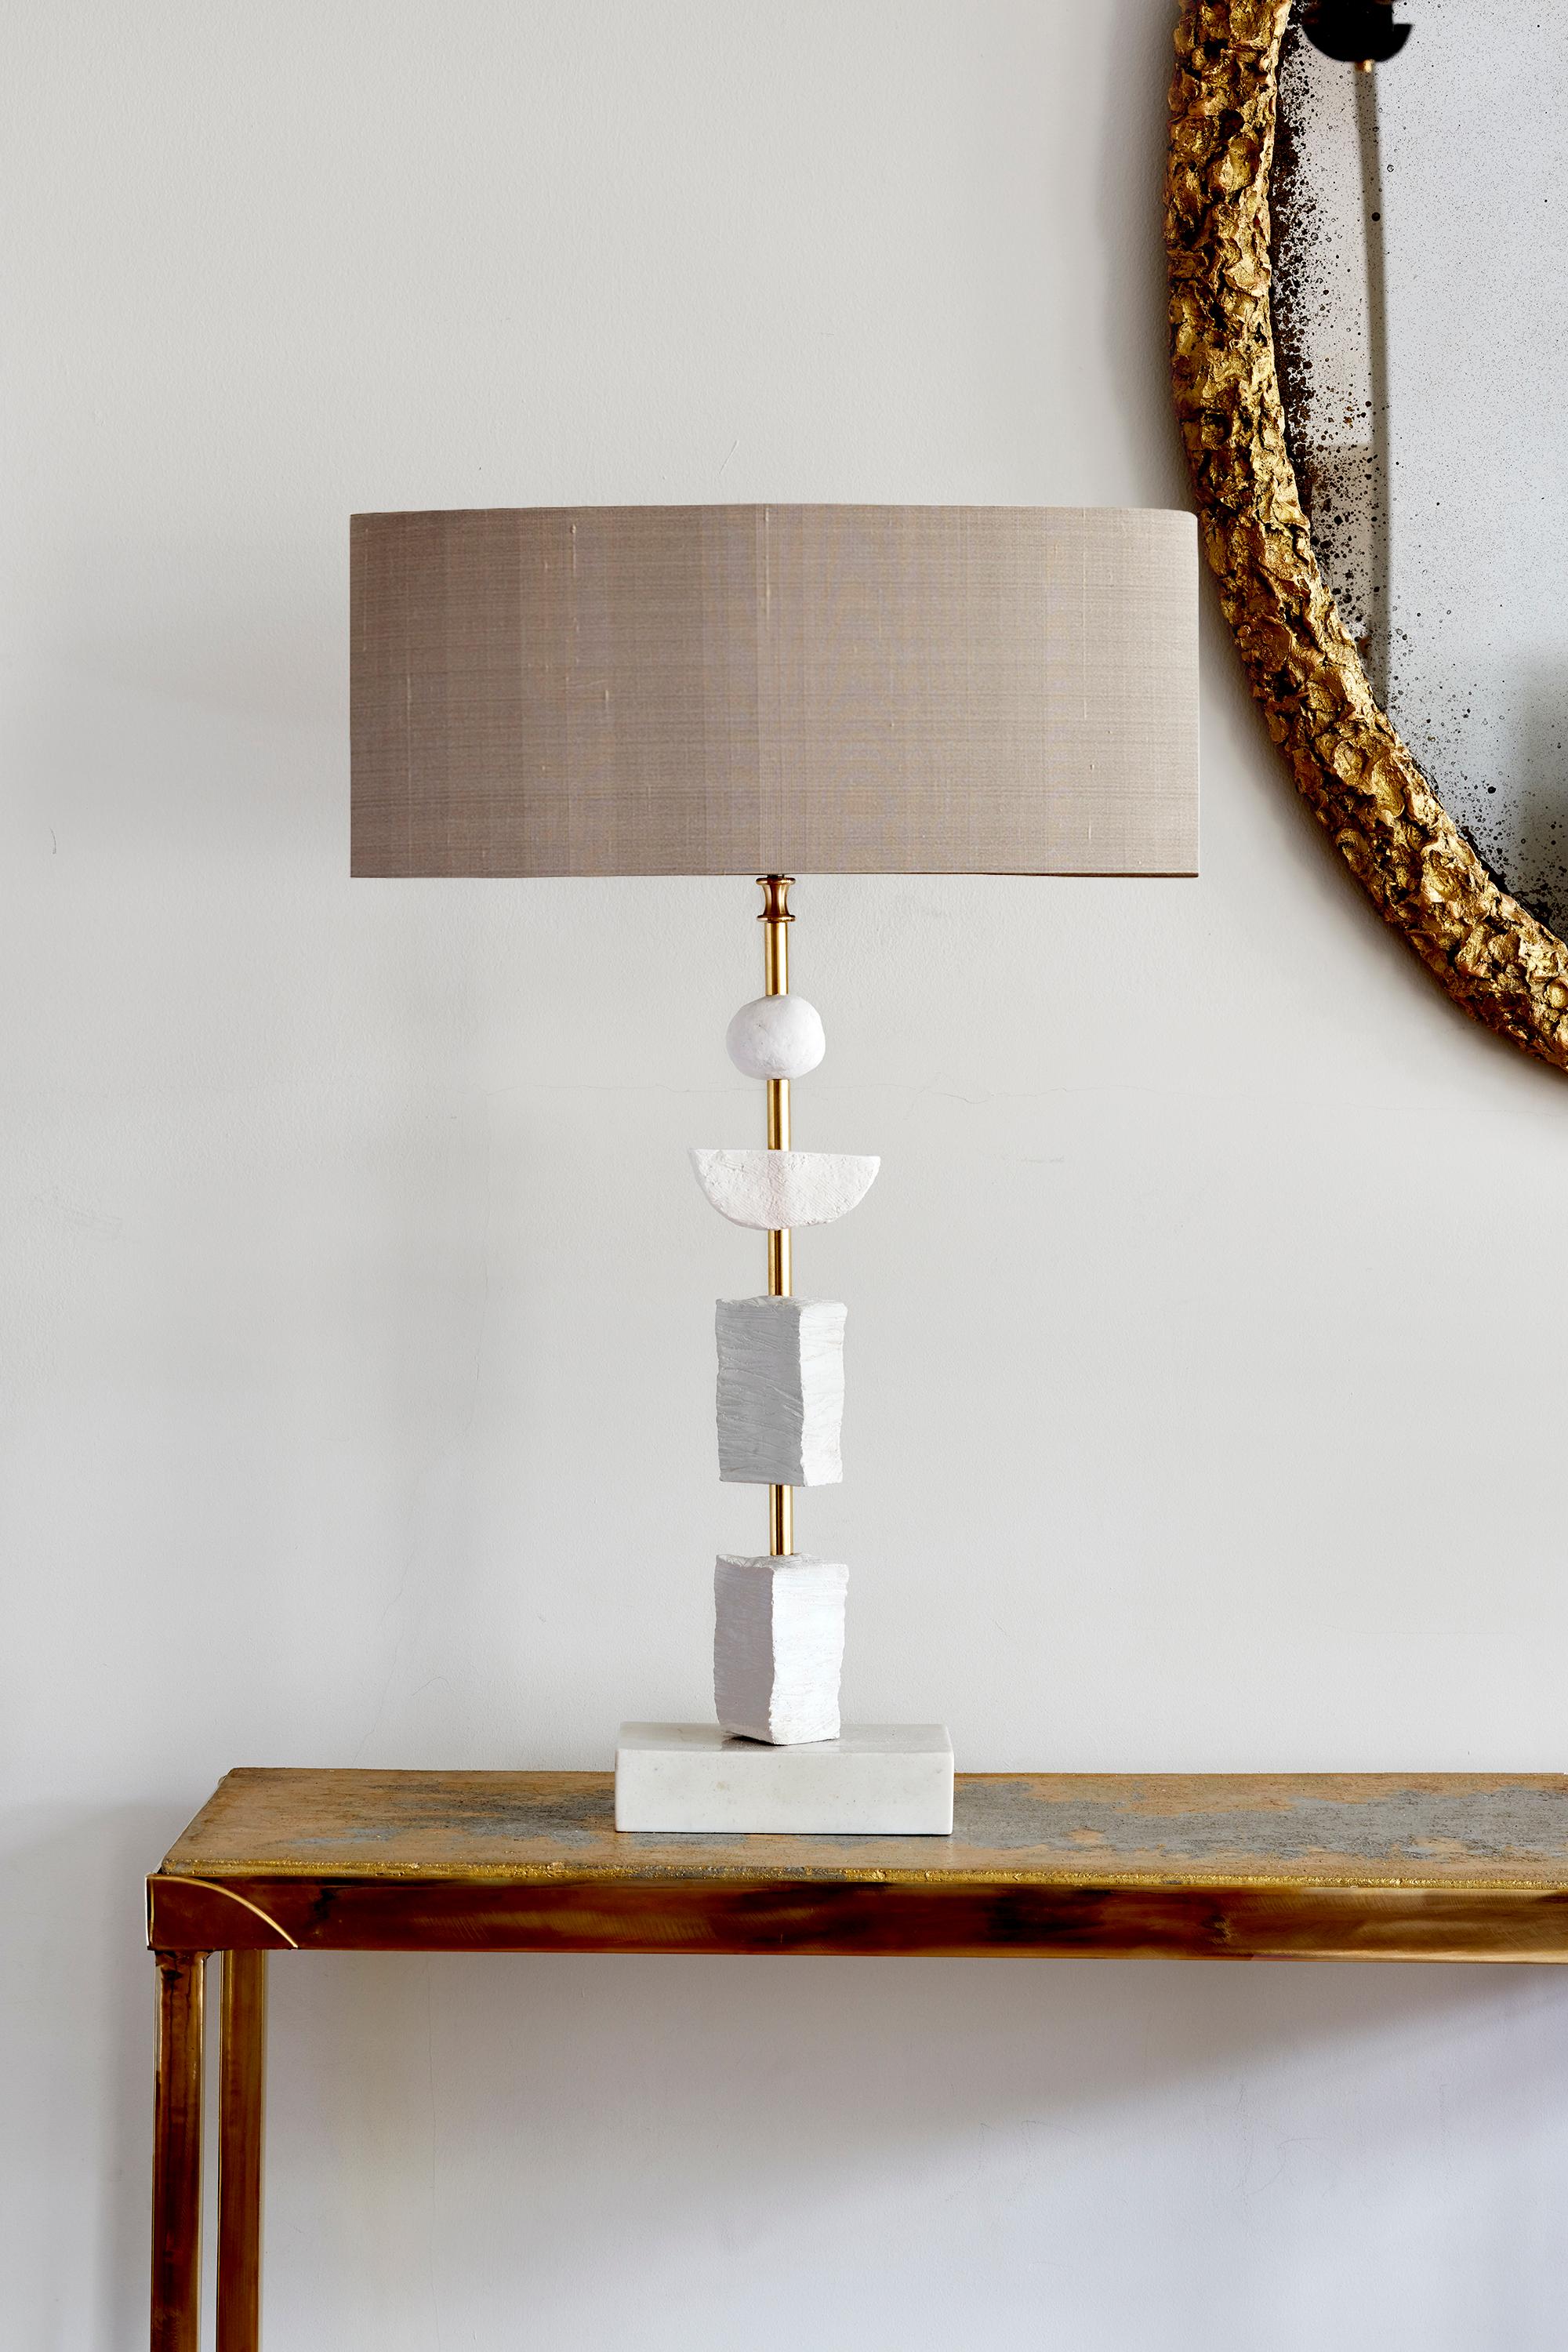 These sculptural contemporary Margit Wittig table lamps are mounted on rectangular slate bases and feature multiple white resin handcrafted cuboids, spheres and semi-circles with organic surface textures.
Interspersed with the shapes are brass